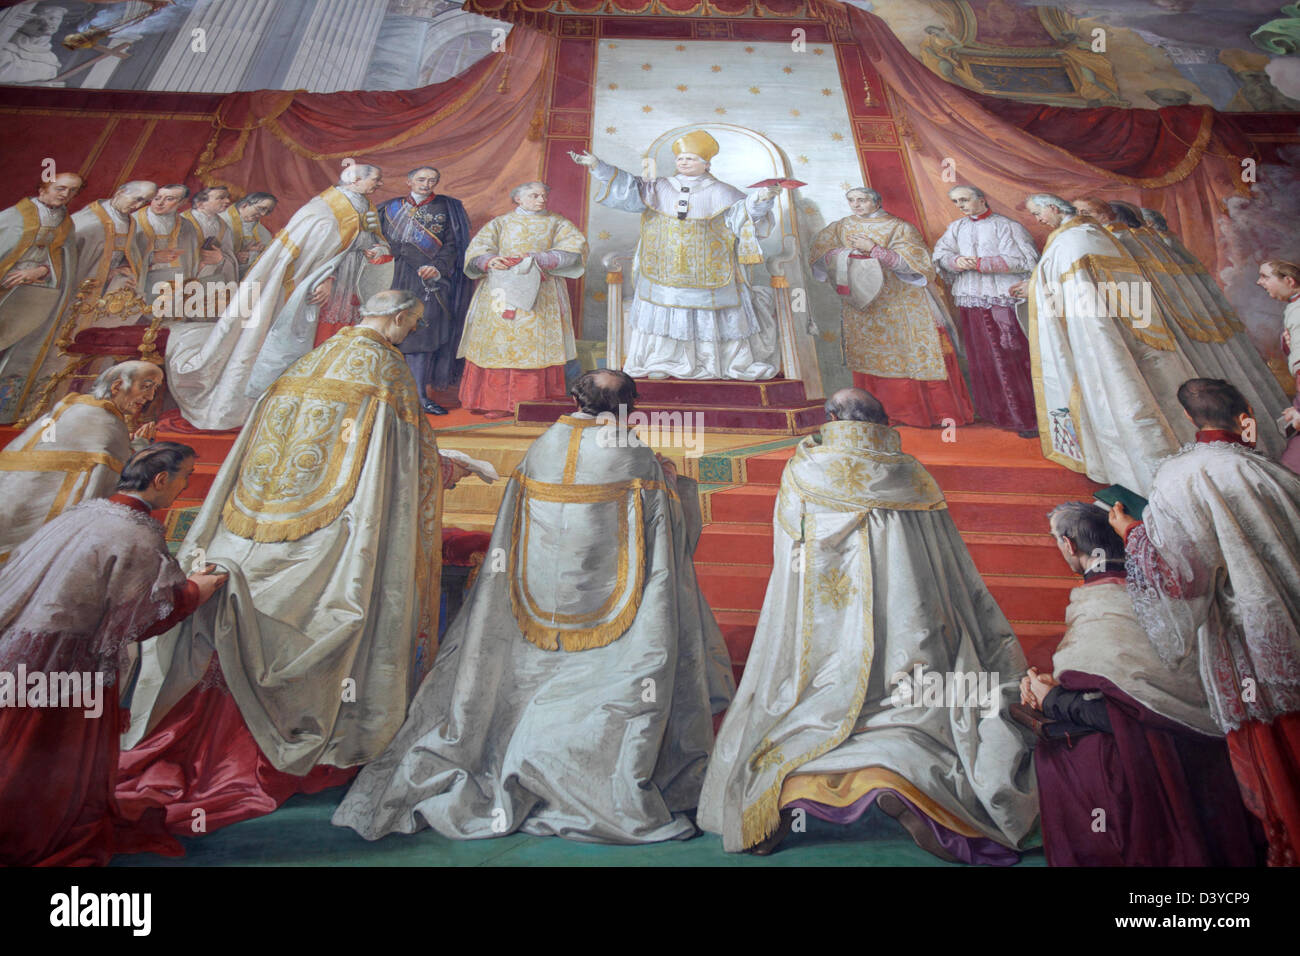 Fresco of Pius IX declaring dogma of Immaculate Conception, Vatican Museums, Rome, Italy Stock Photo